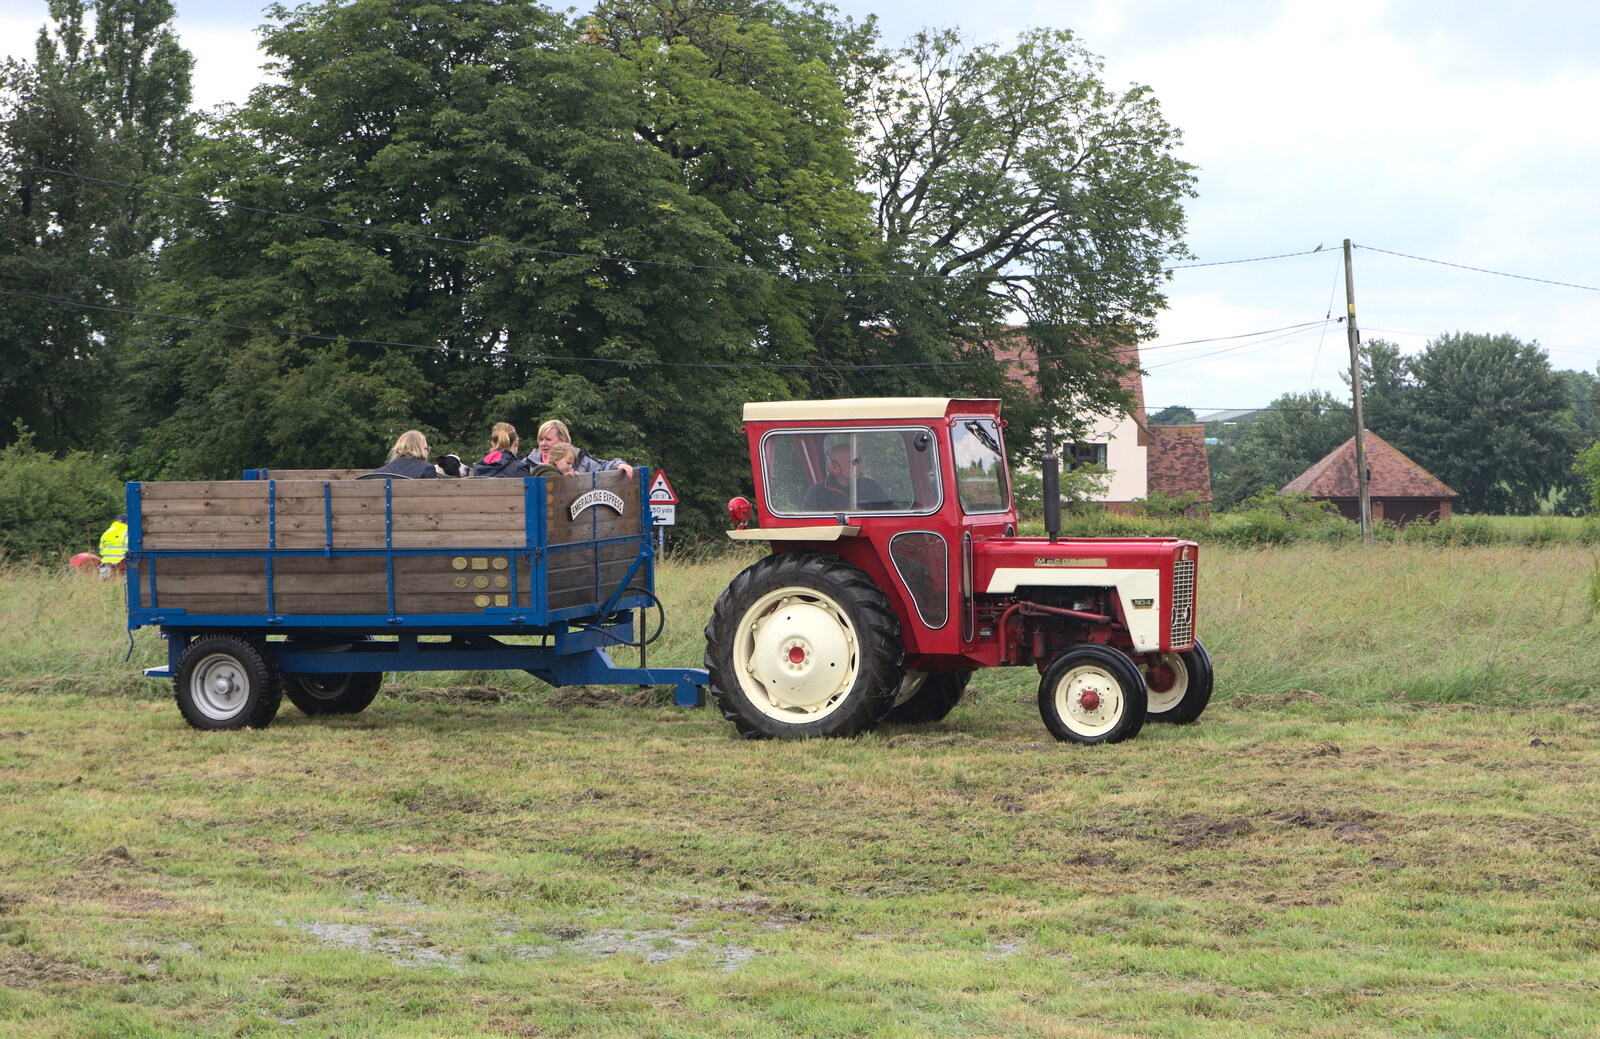 A tractor and trailer arrives from Thrandeston Pig, Little Green, Thrandeston, Suffolk - 26th June 2016